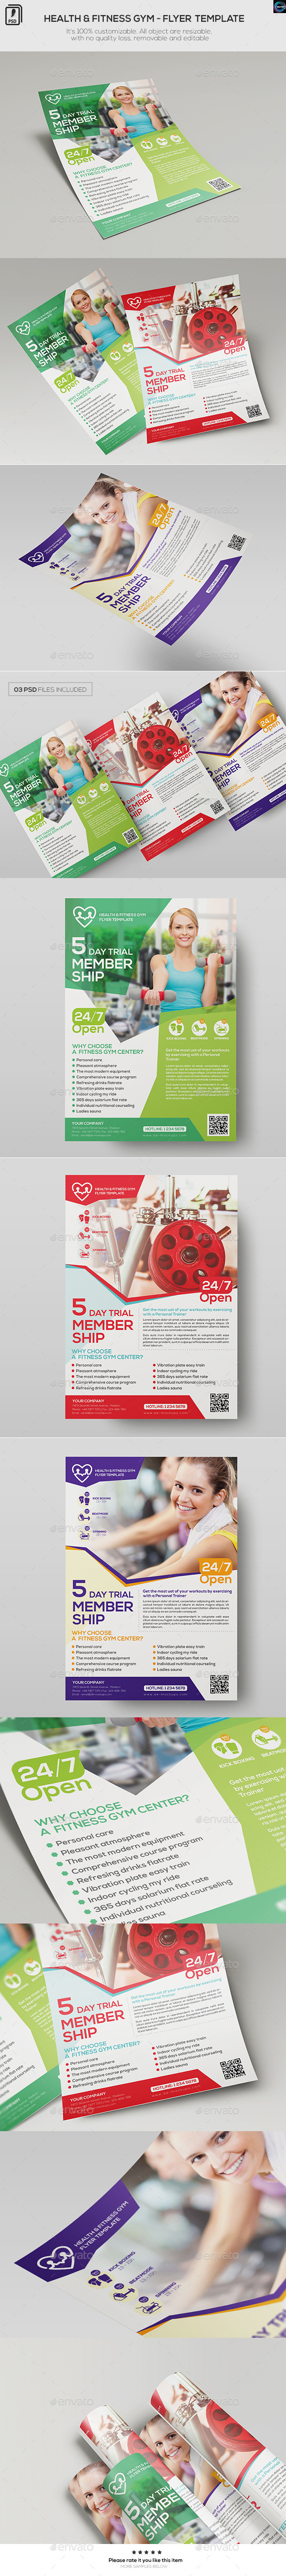 Health and Fitness GYM - Flyer Template